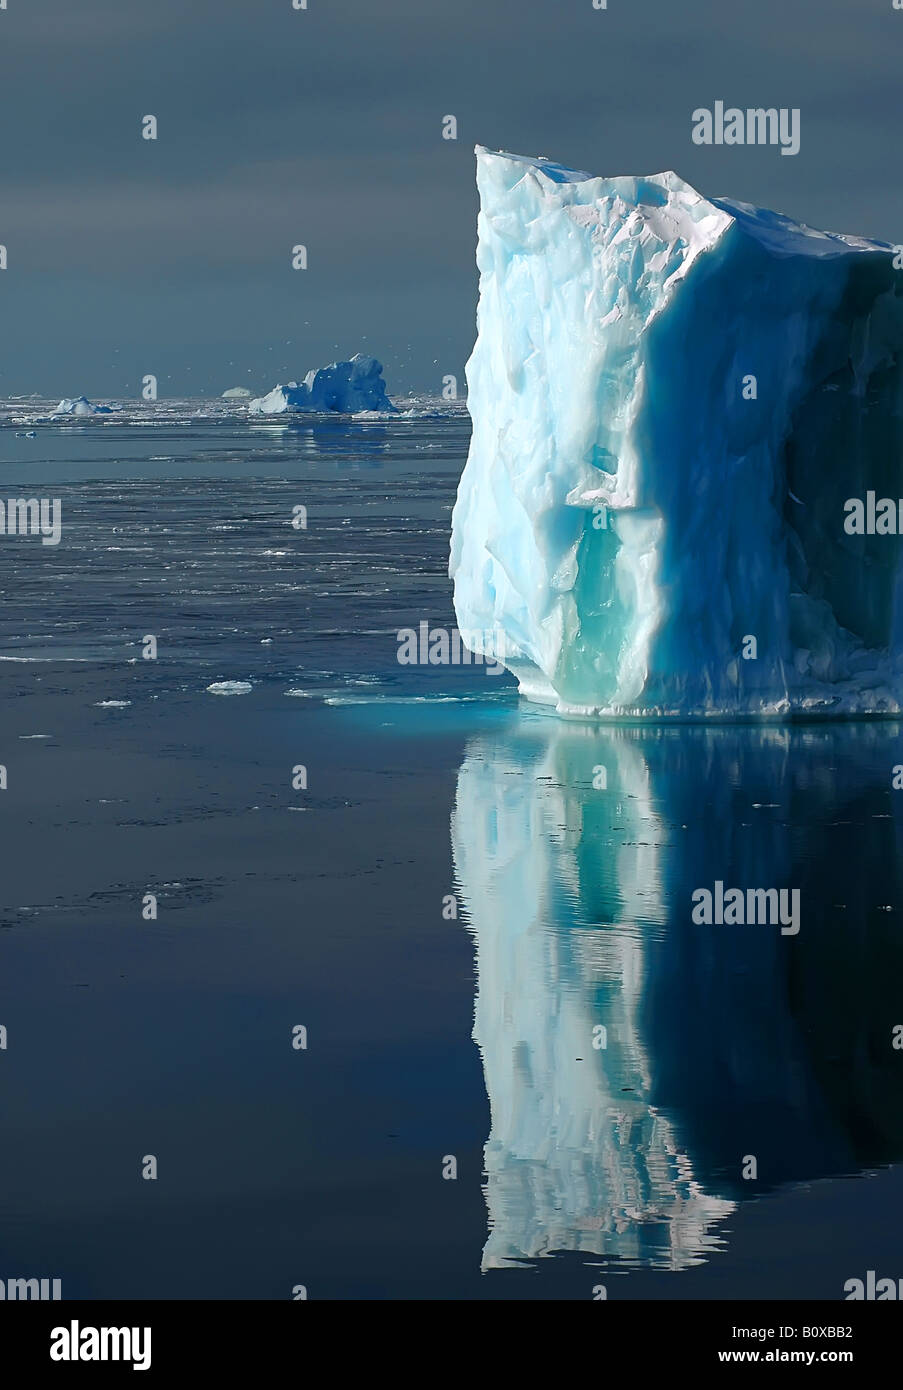 Bright sunlit side of an Antarctic iceberg. Icebergs and snow petrels in the background., Antarctica Stock Photo